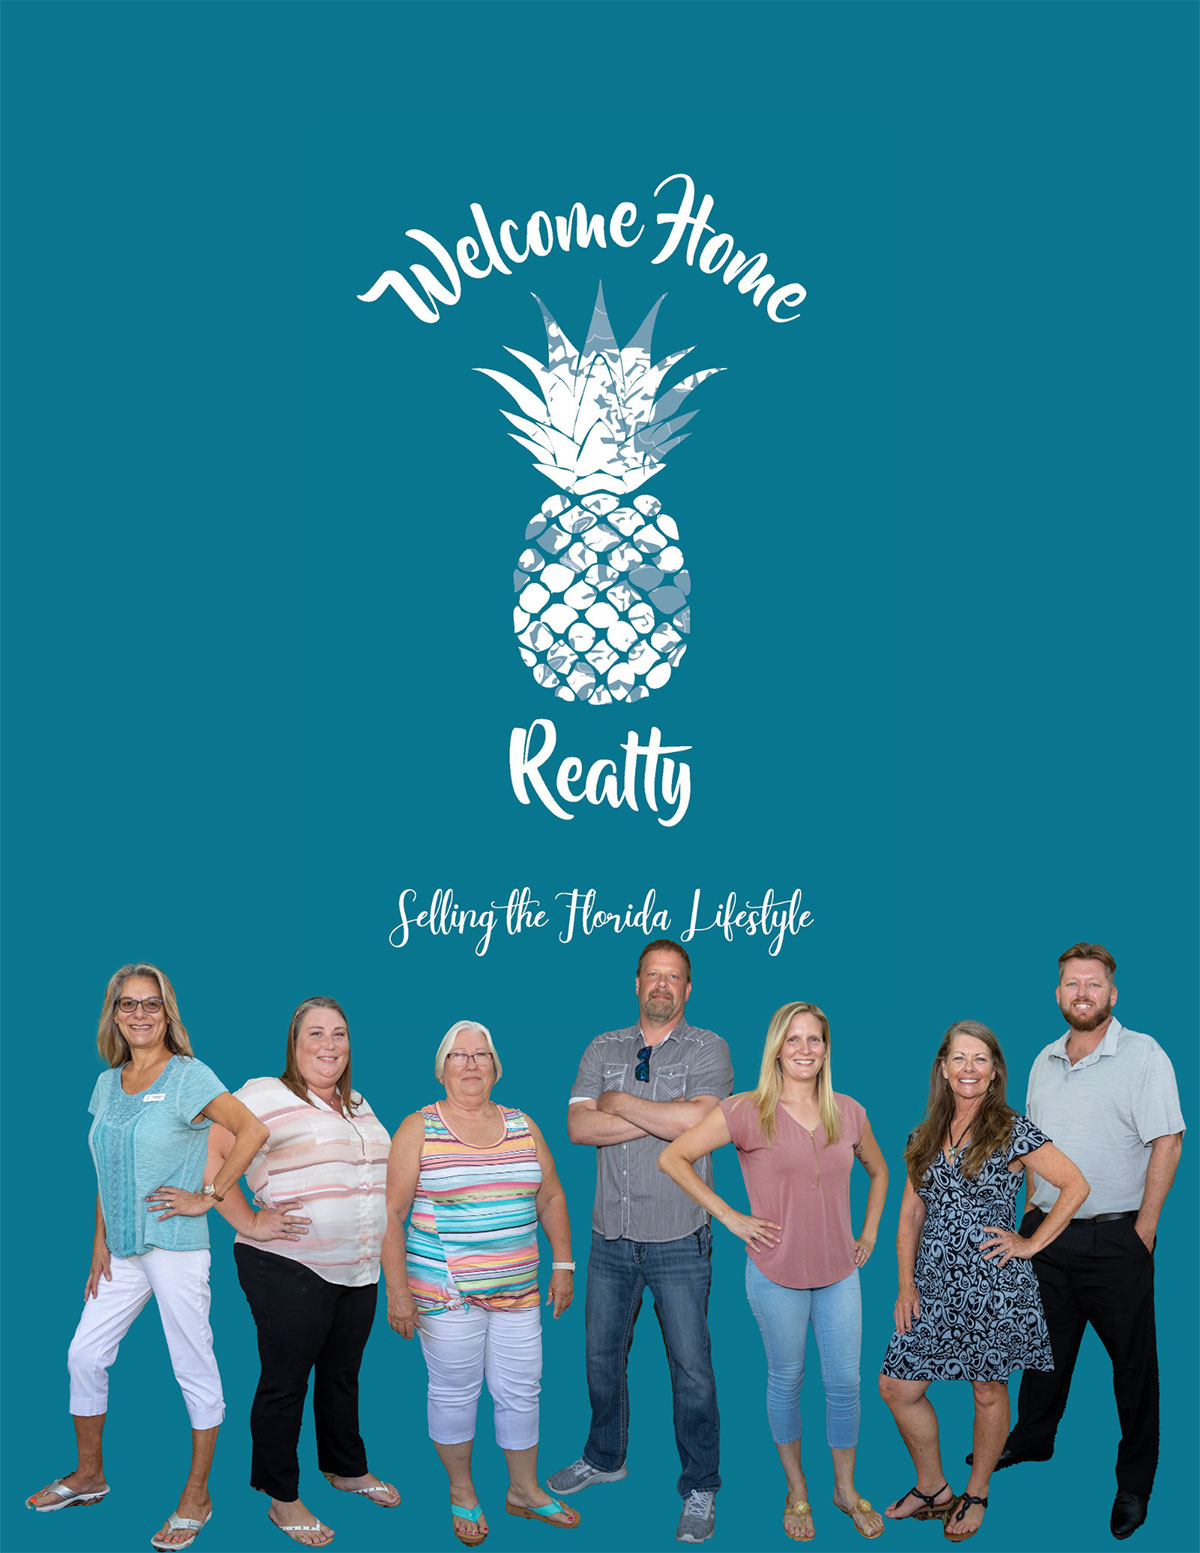 Welcome Home Realty